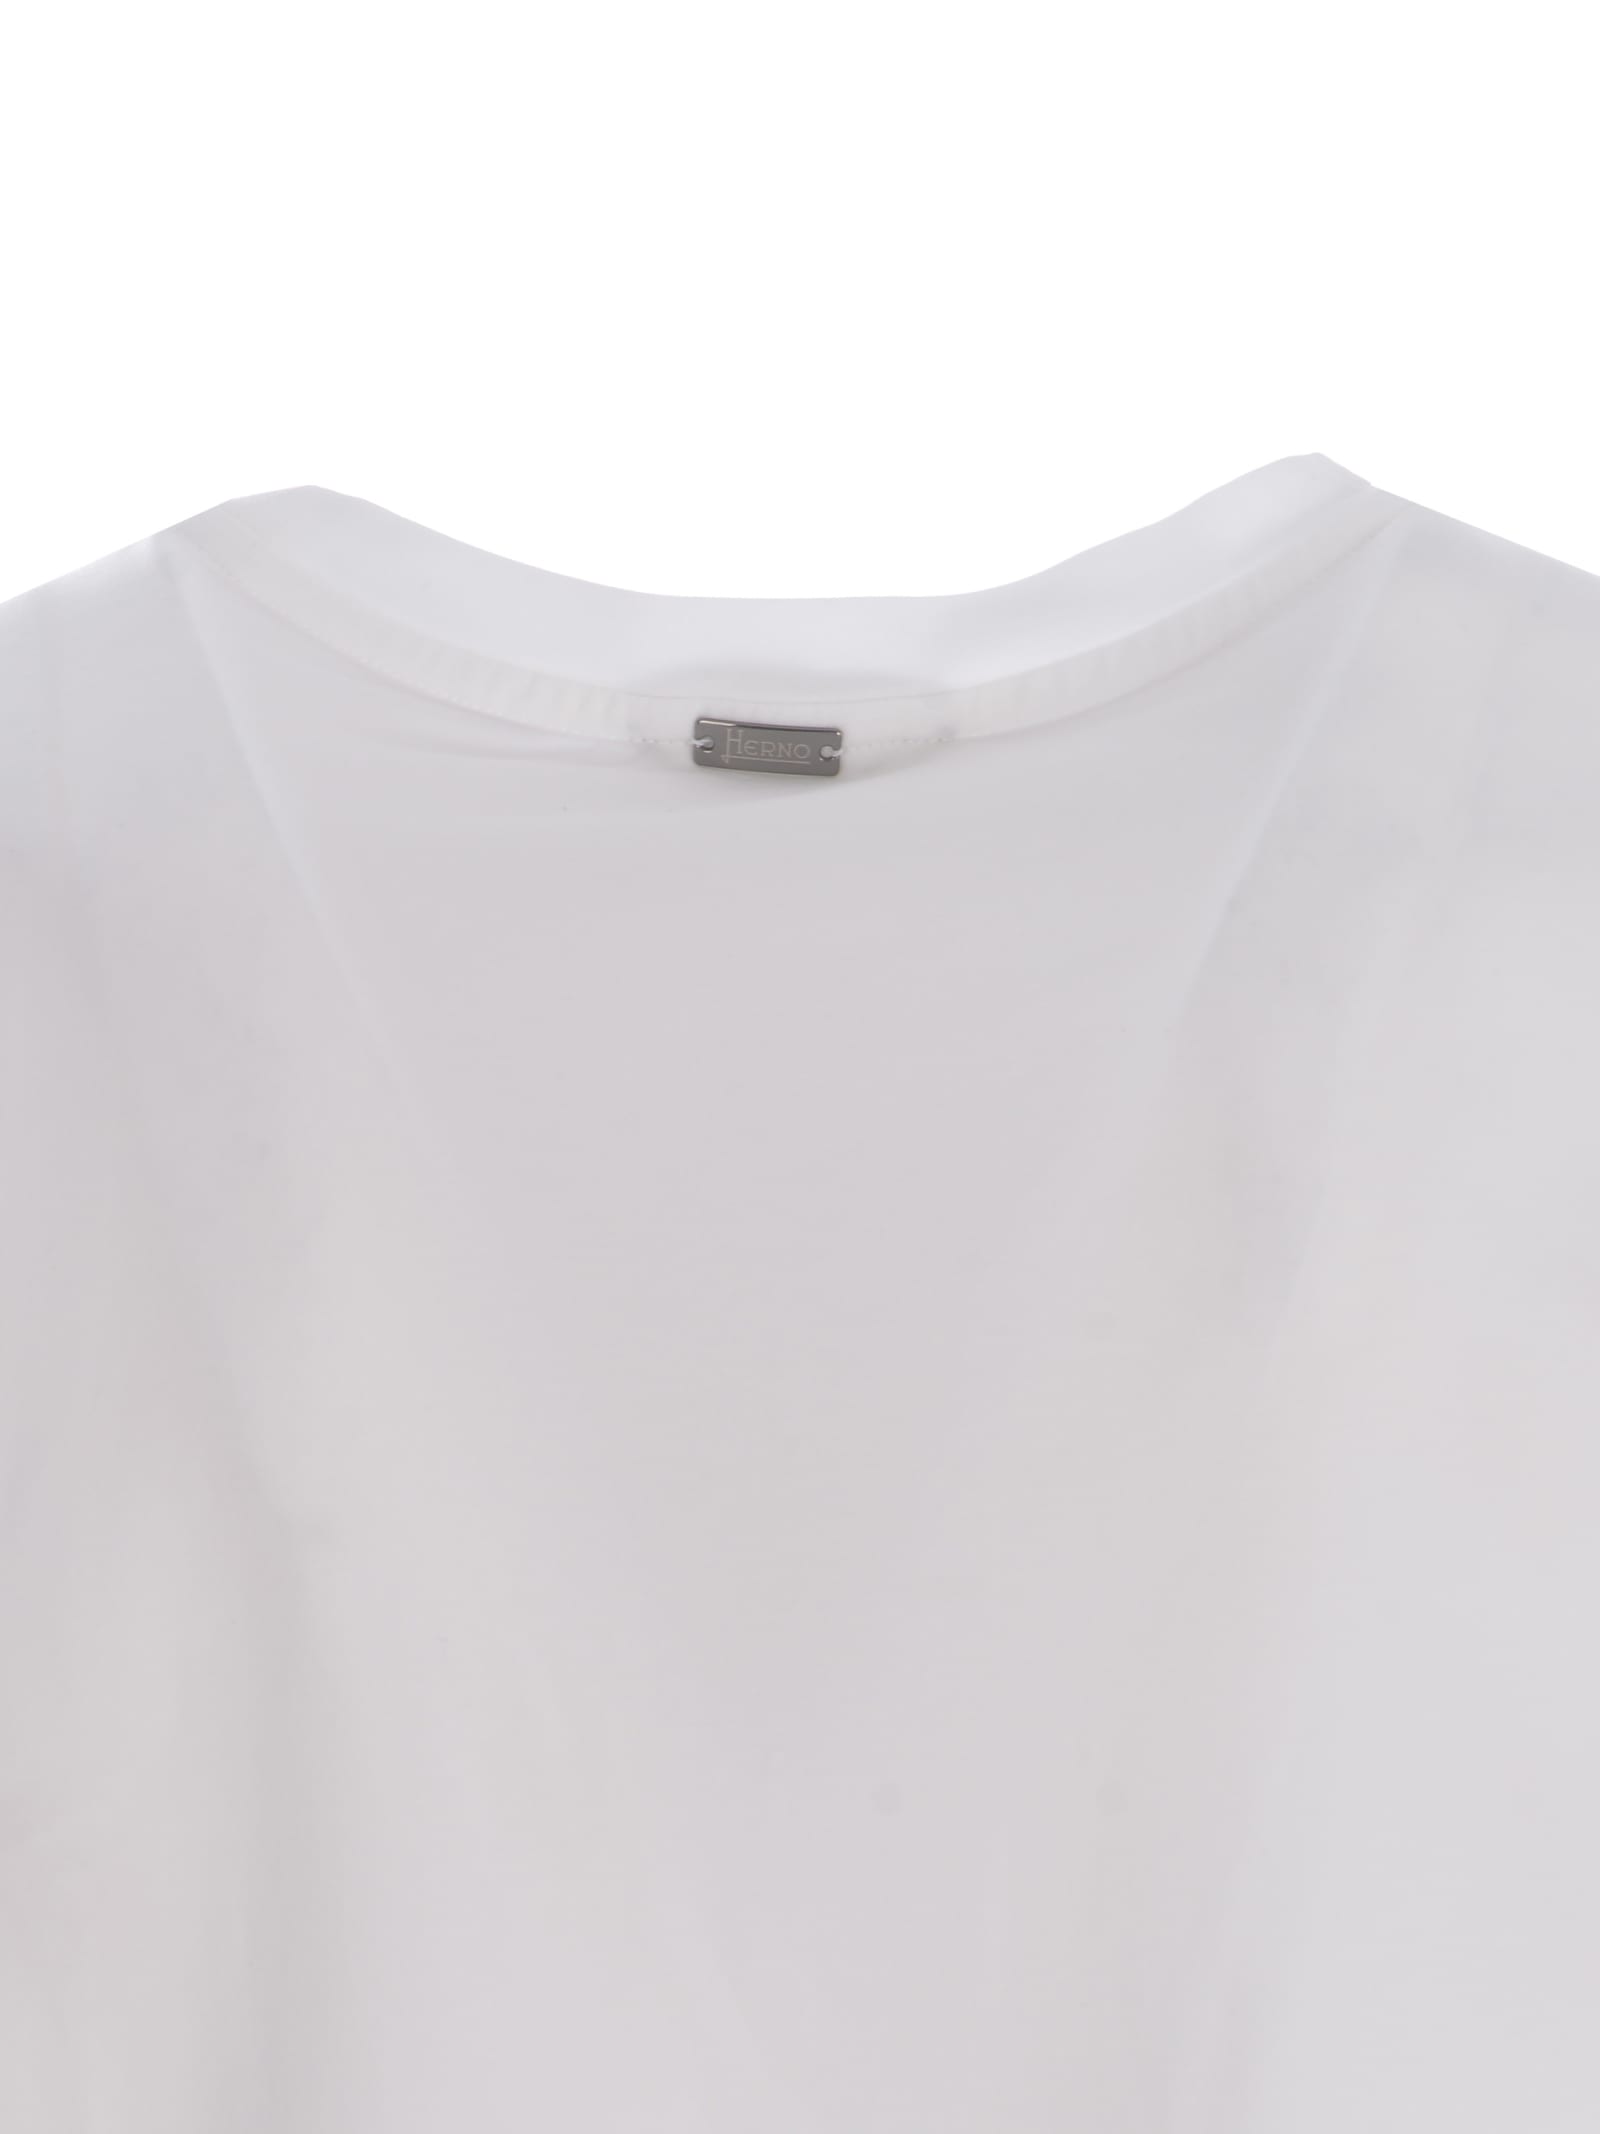 Shop Herno T-shirt  Made Of Cotton Jersey In Bianco